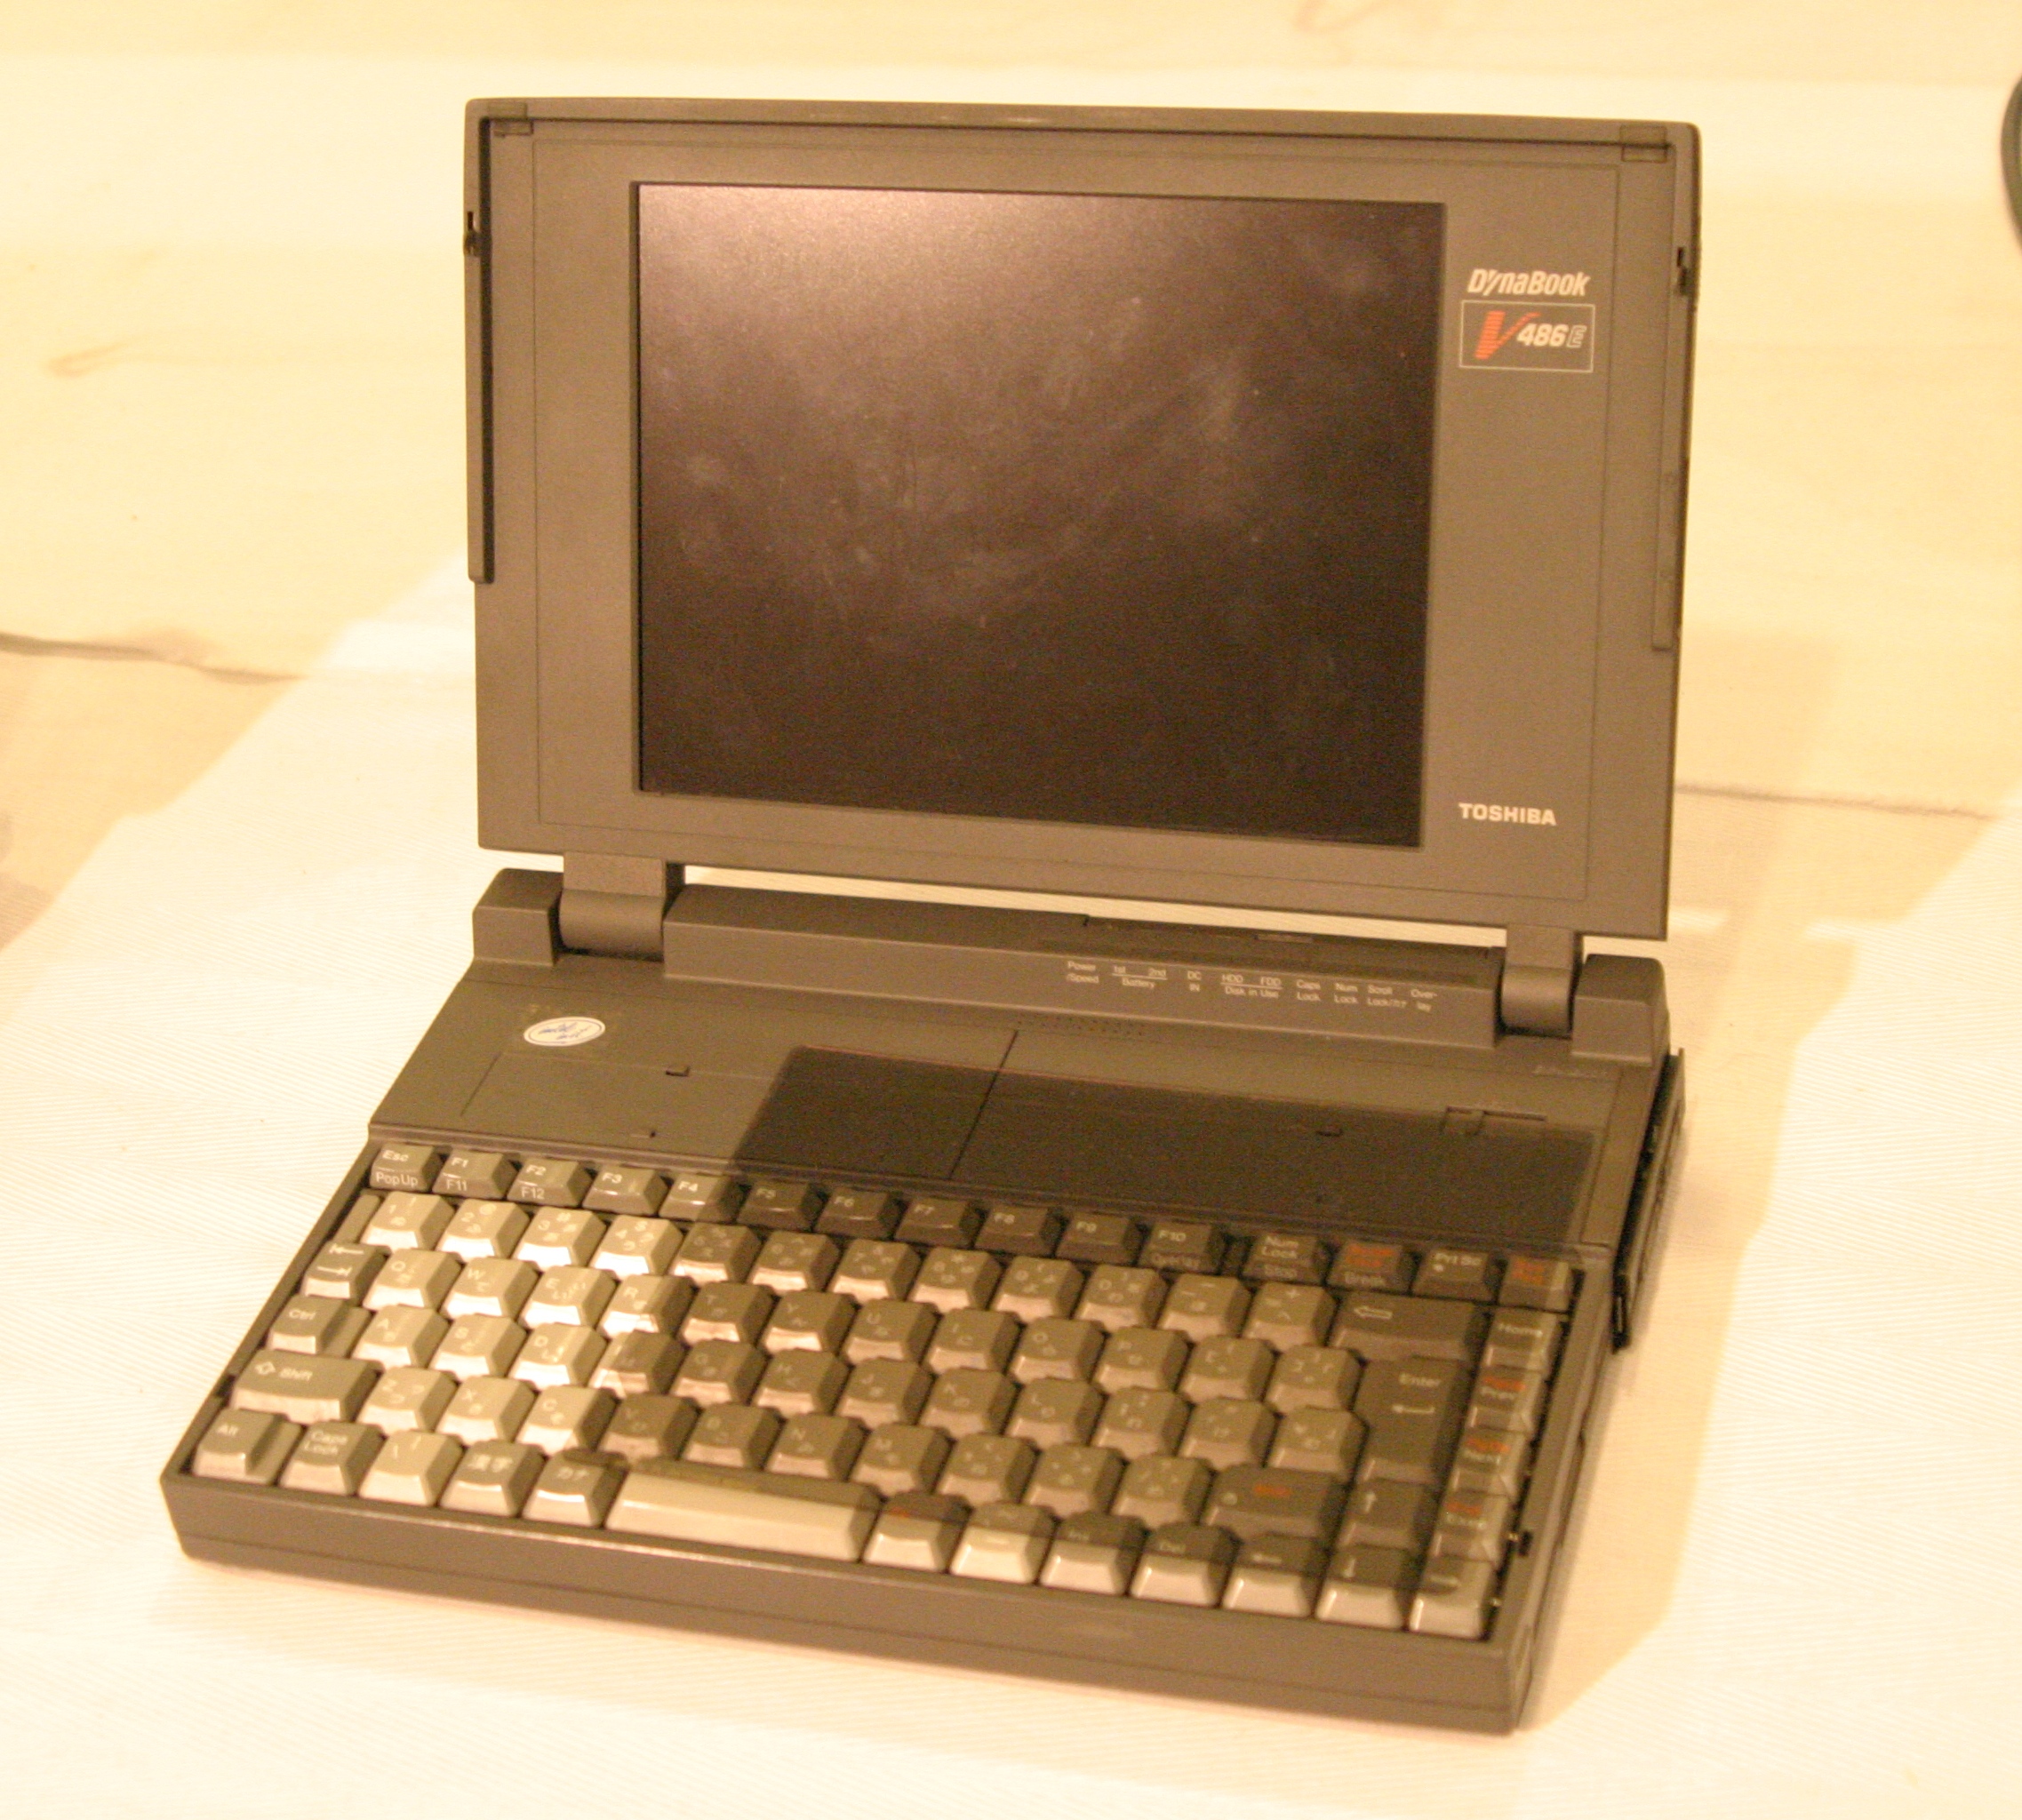 TOSHIBA | Personal Computers | KCG Computer Museum (Satellite of the Histrical Computers)